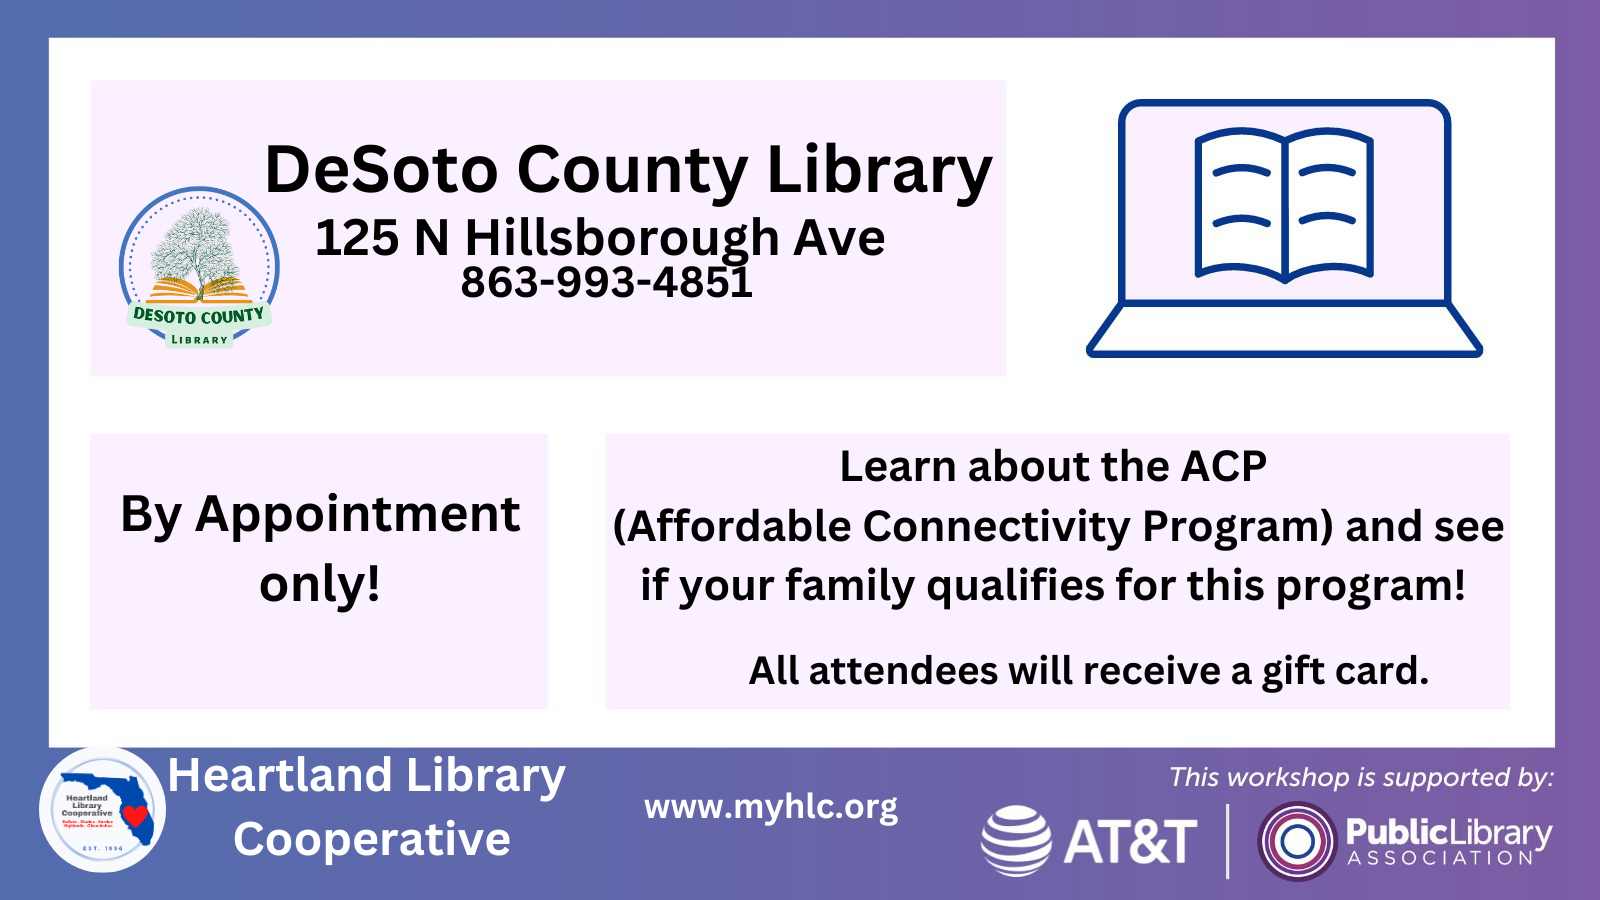 If you would like assistance in applying for the ACP or Affordable Connectivity Program, schedule an appointment with the DeSoto County Public Library by calling 863-993-4851.